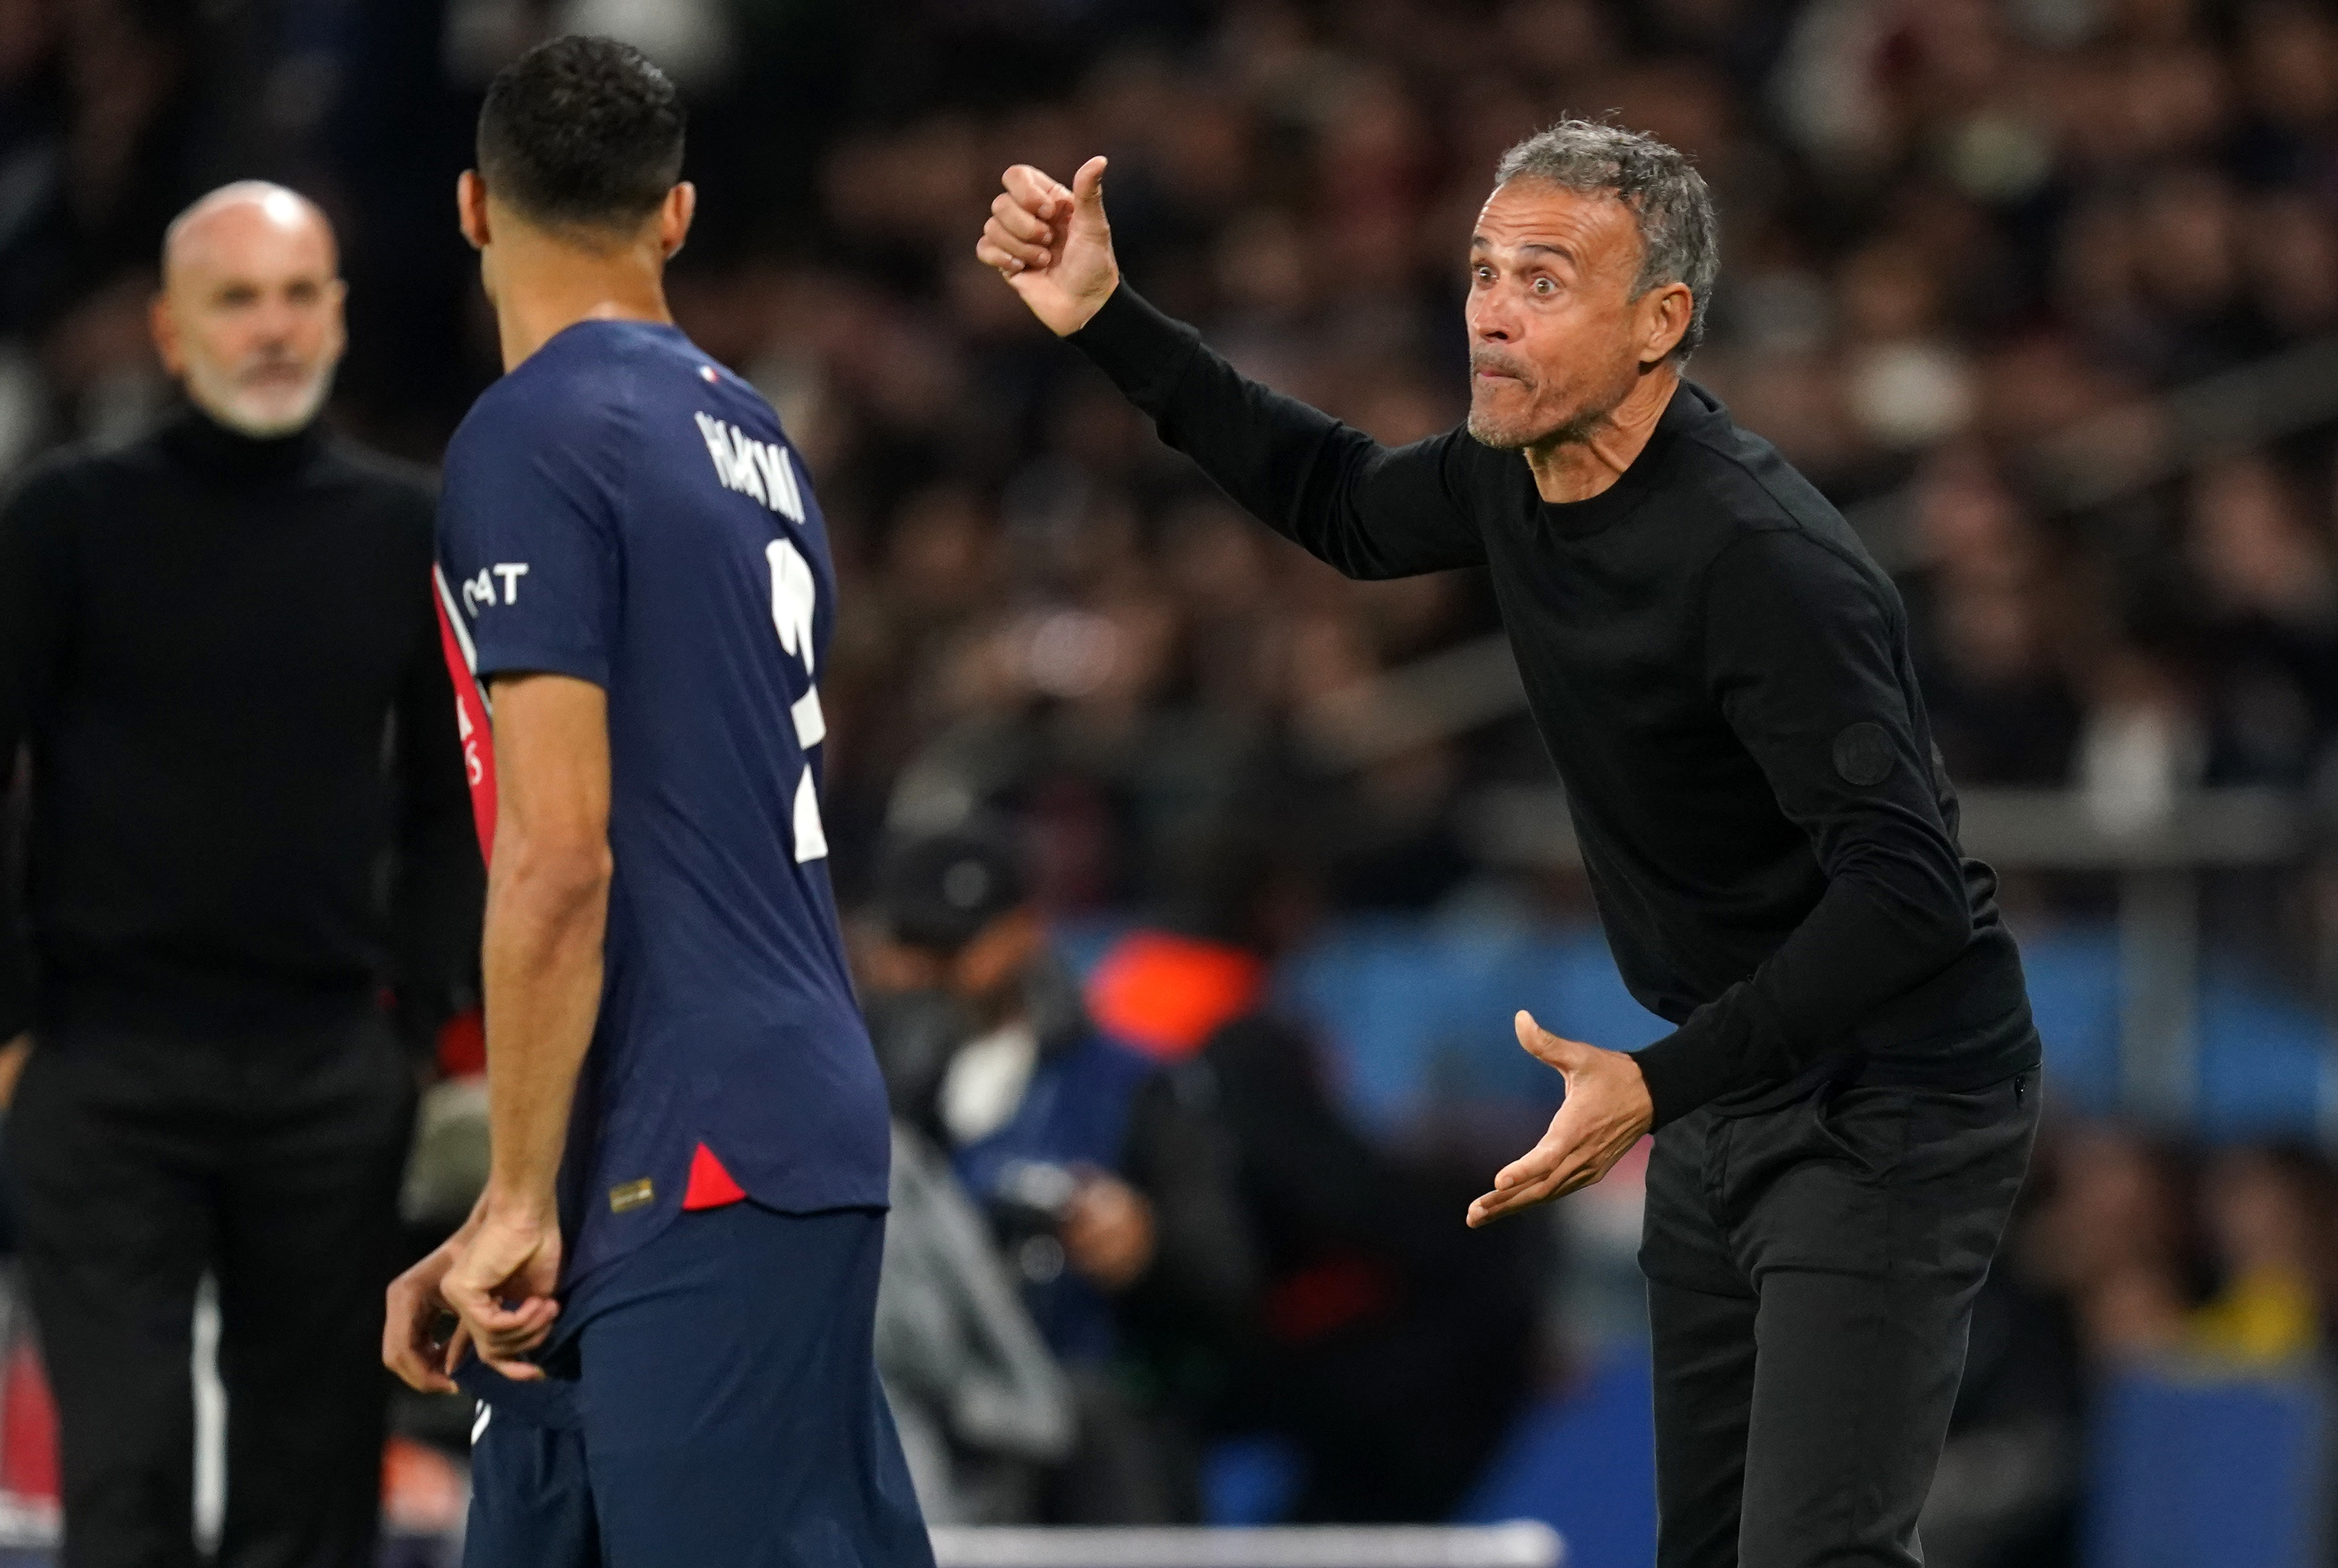 Paris St Germain manager Luis Enrique was both relieved and frustrated after a 1-1 Champions League draw with Newcastle